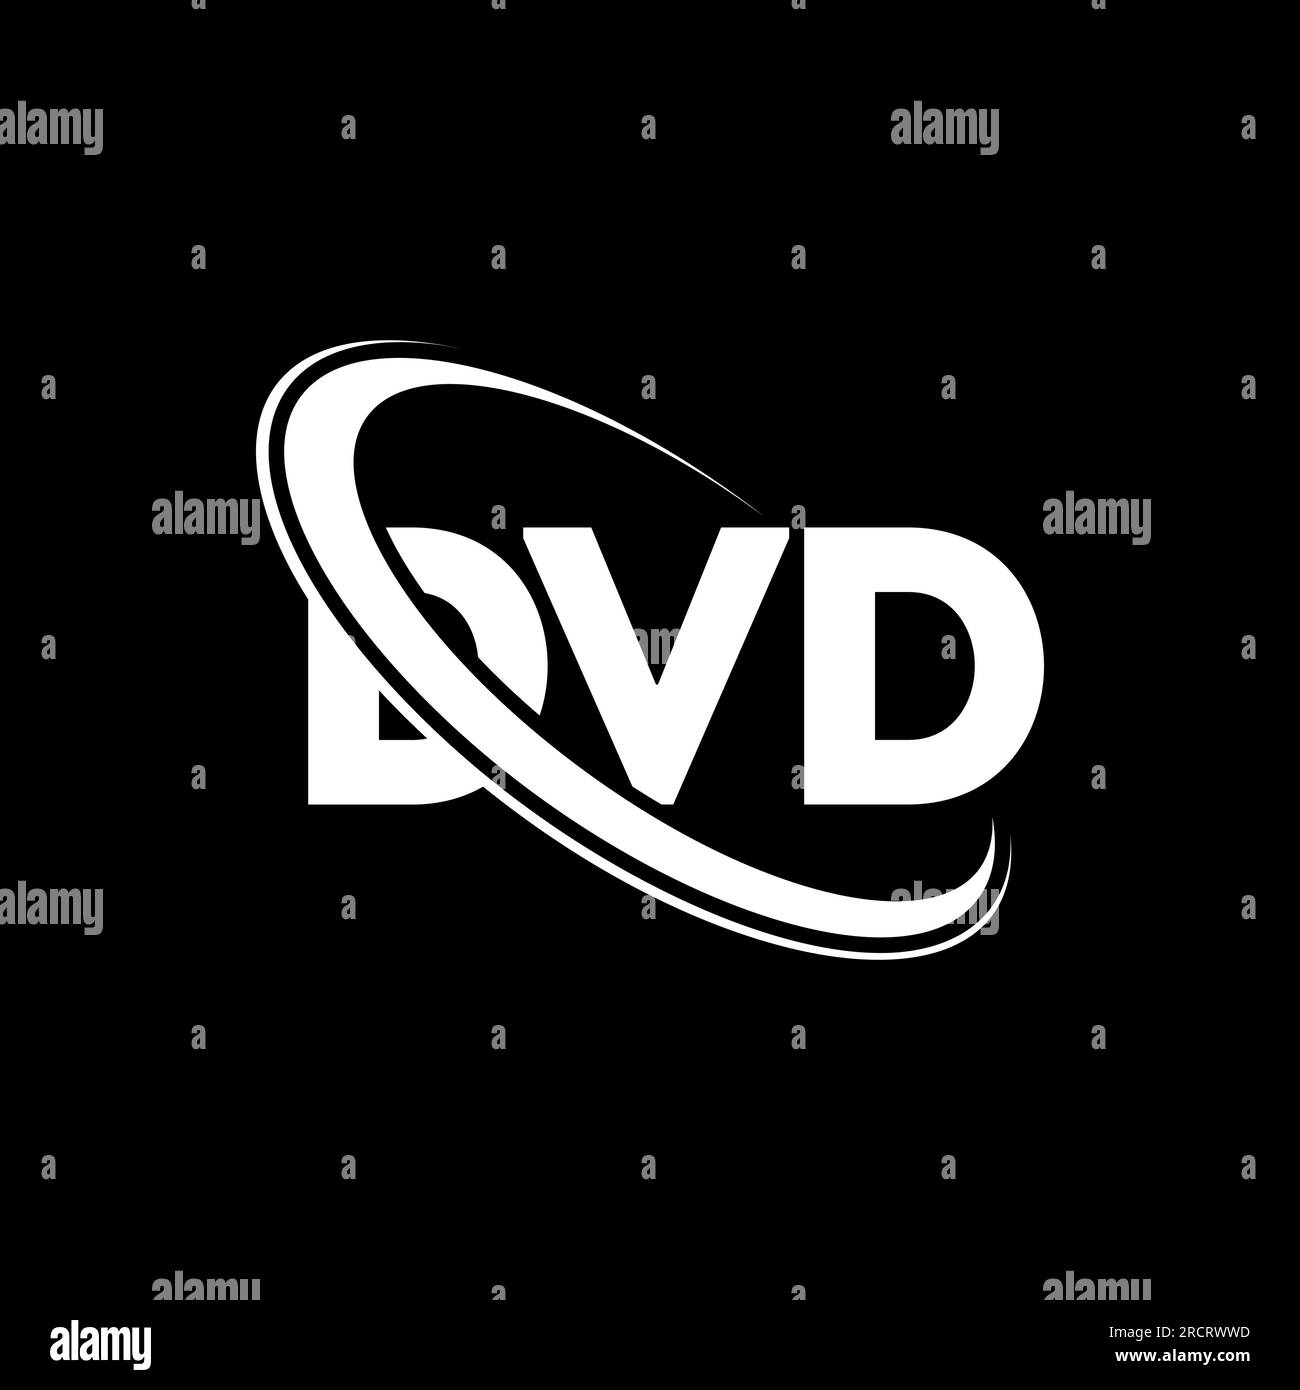 Dvd technology logo Black and White Stock Photos & Images - Alamy